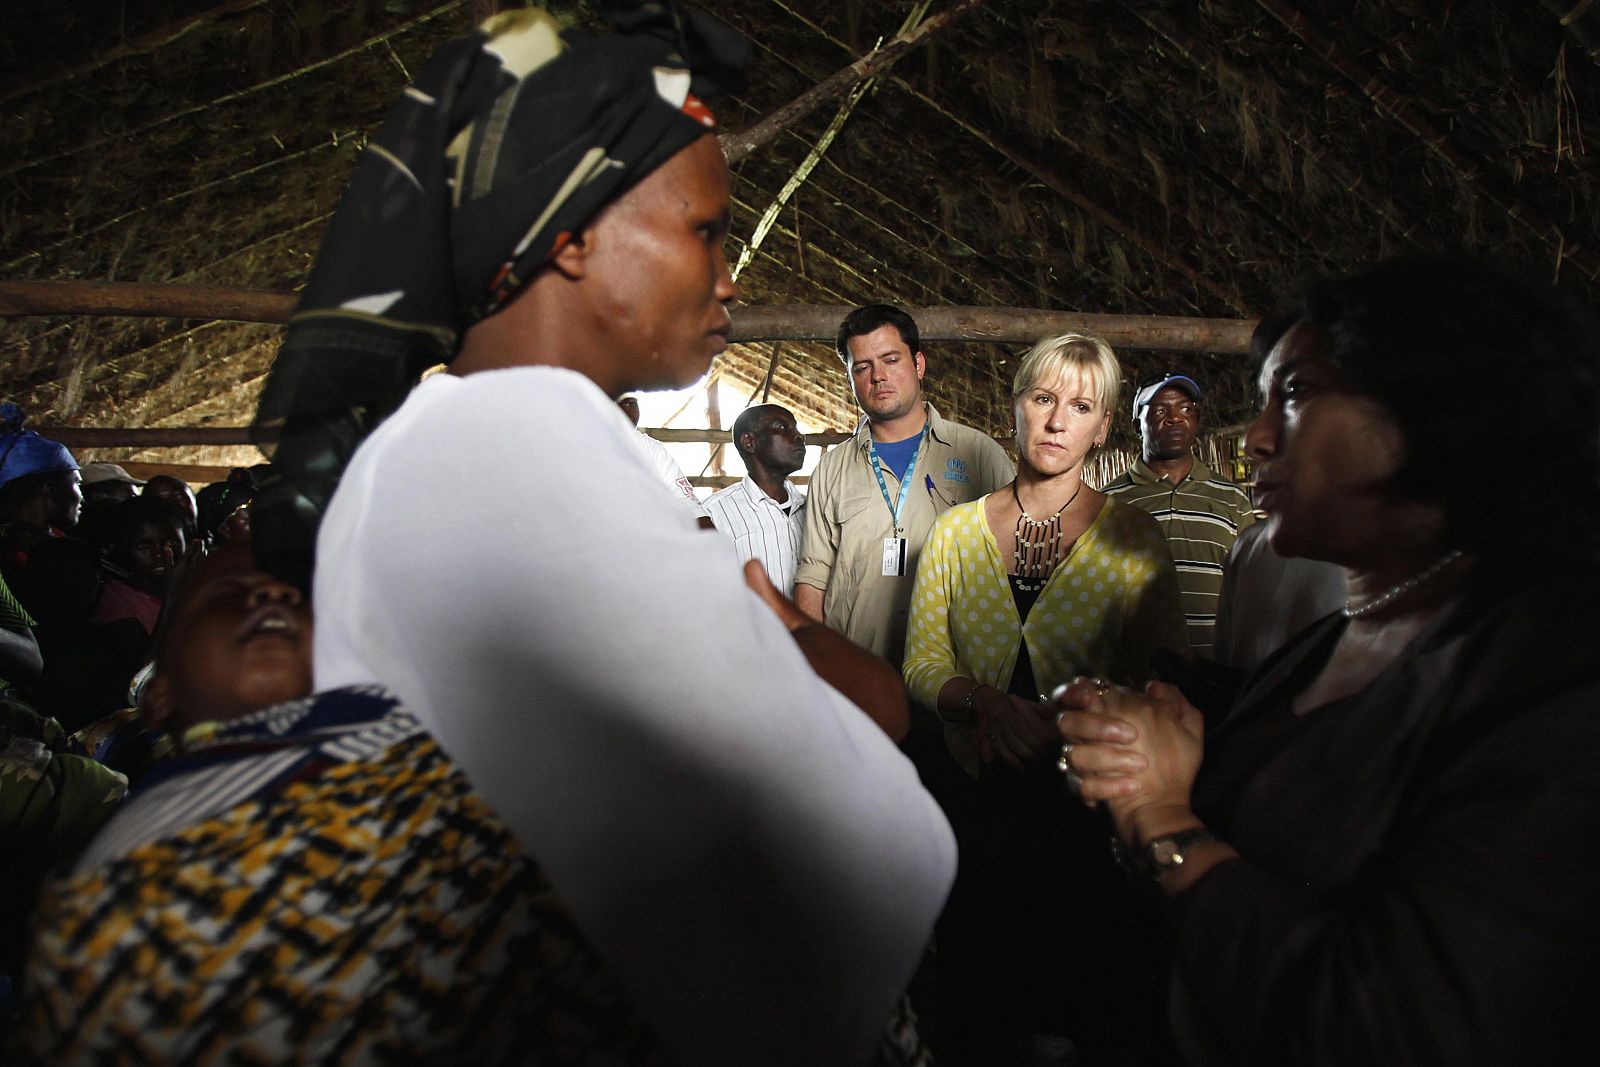 Margot Wallstrom, the UN's special representative on sexual violence, listens to villagers in Kitchanga, in eastern Democratic Republic of Congo